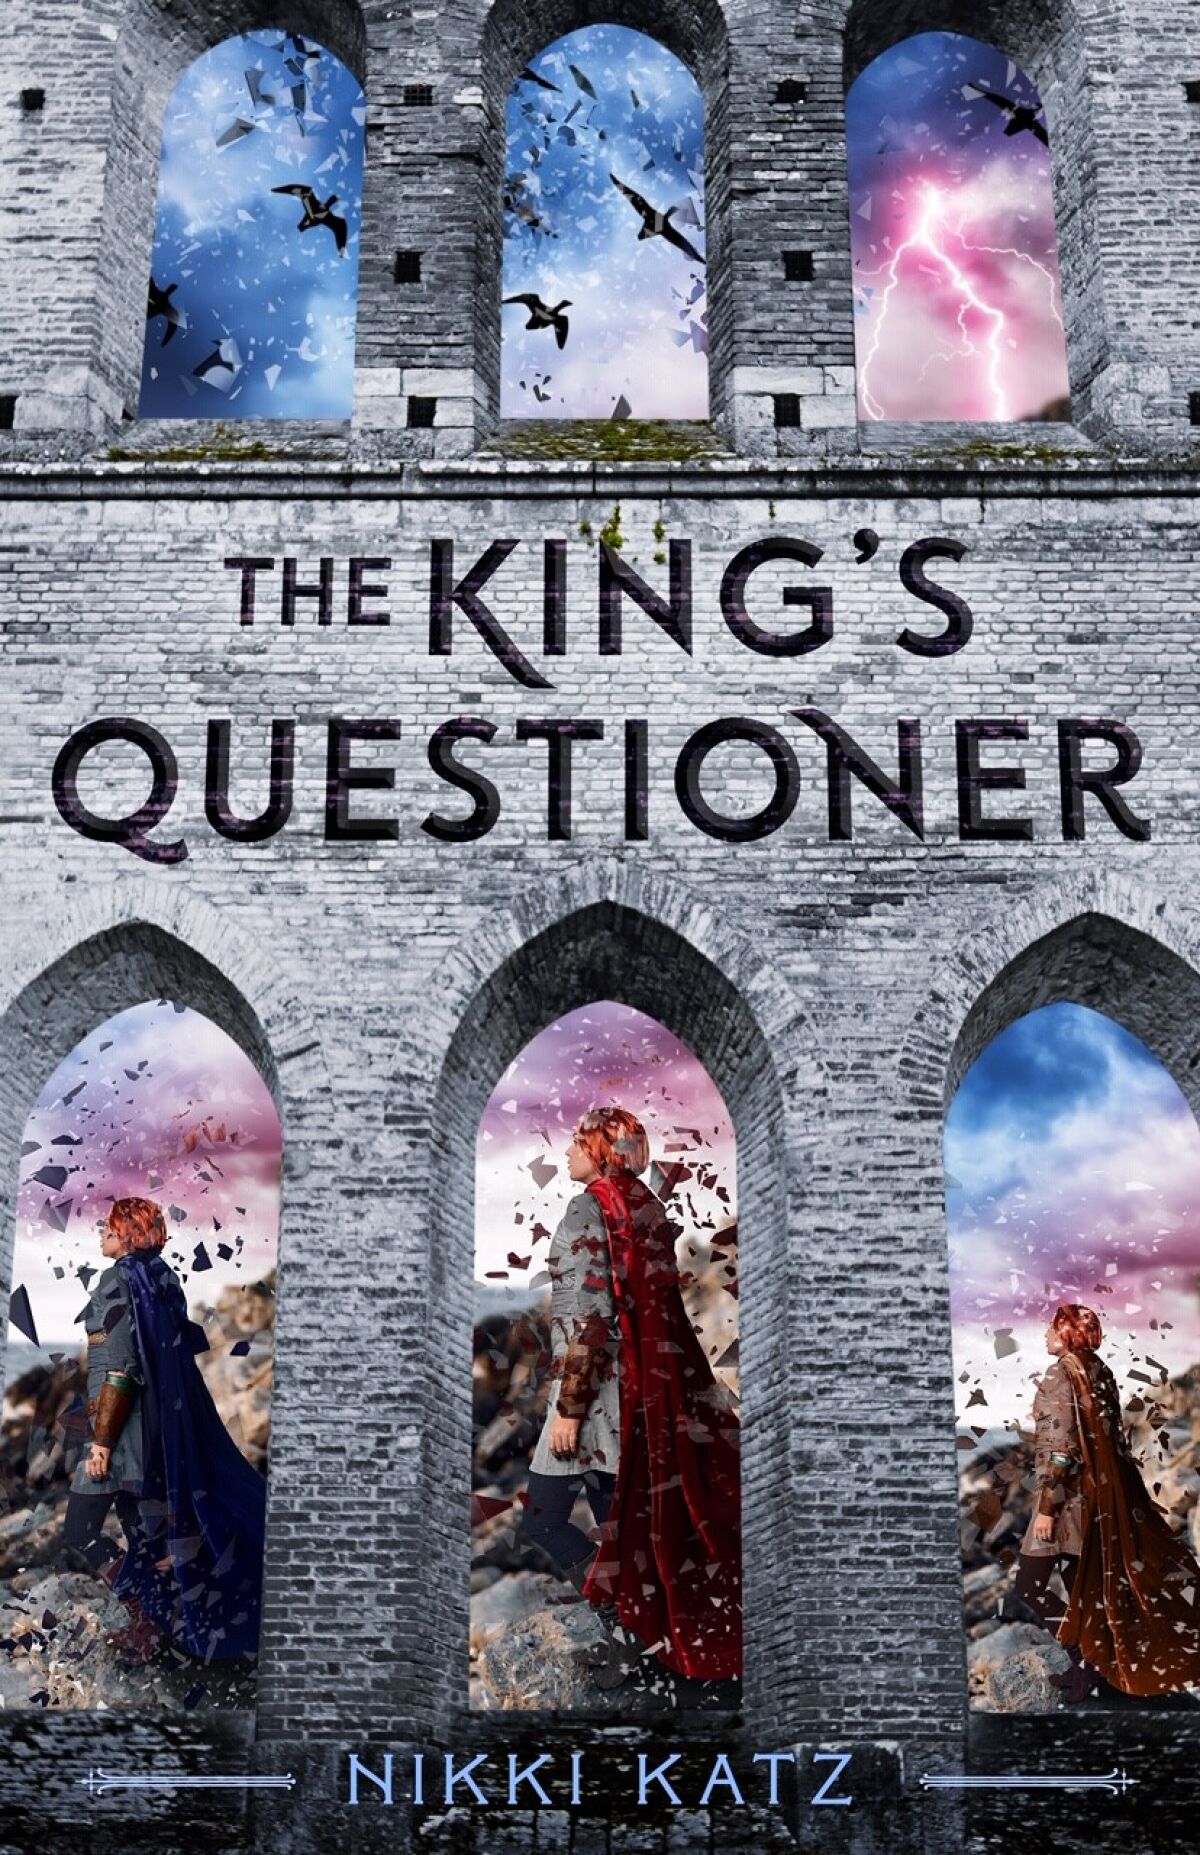 The cover of "The King's Questioner"